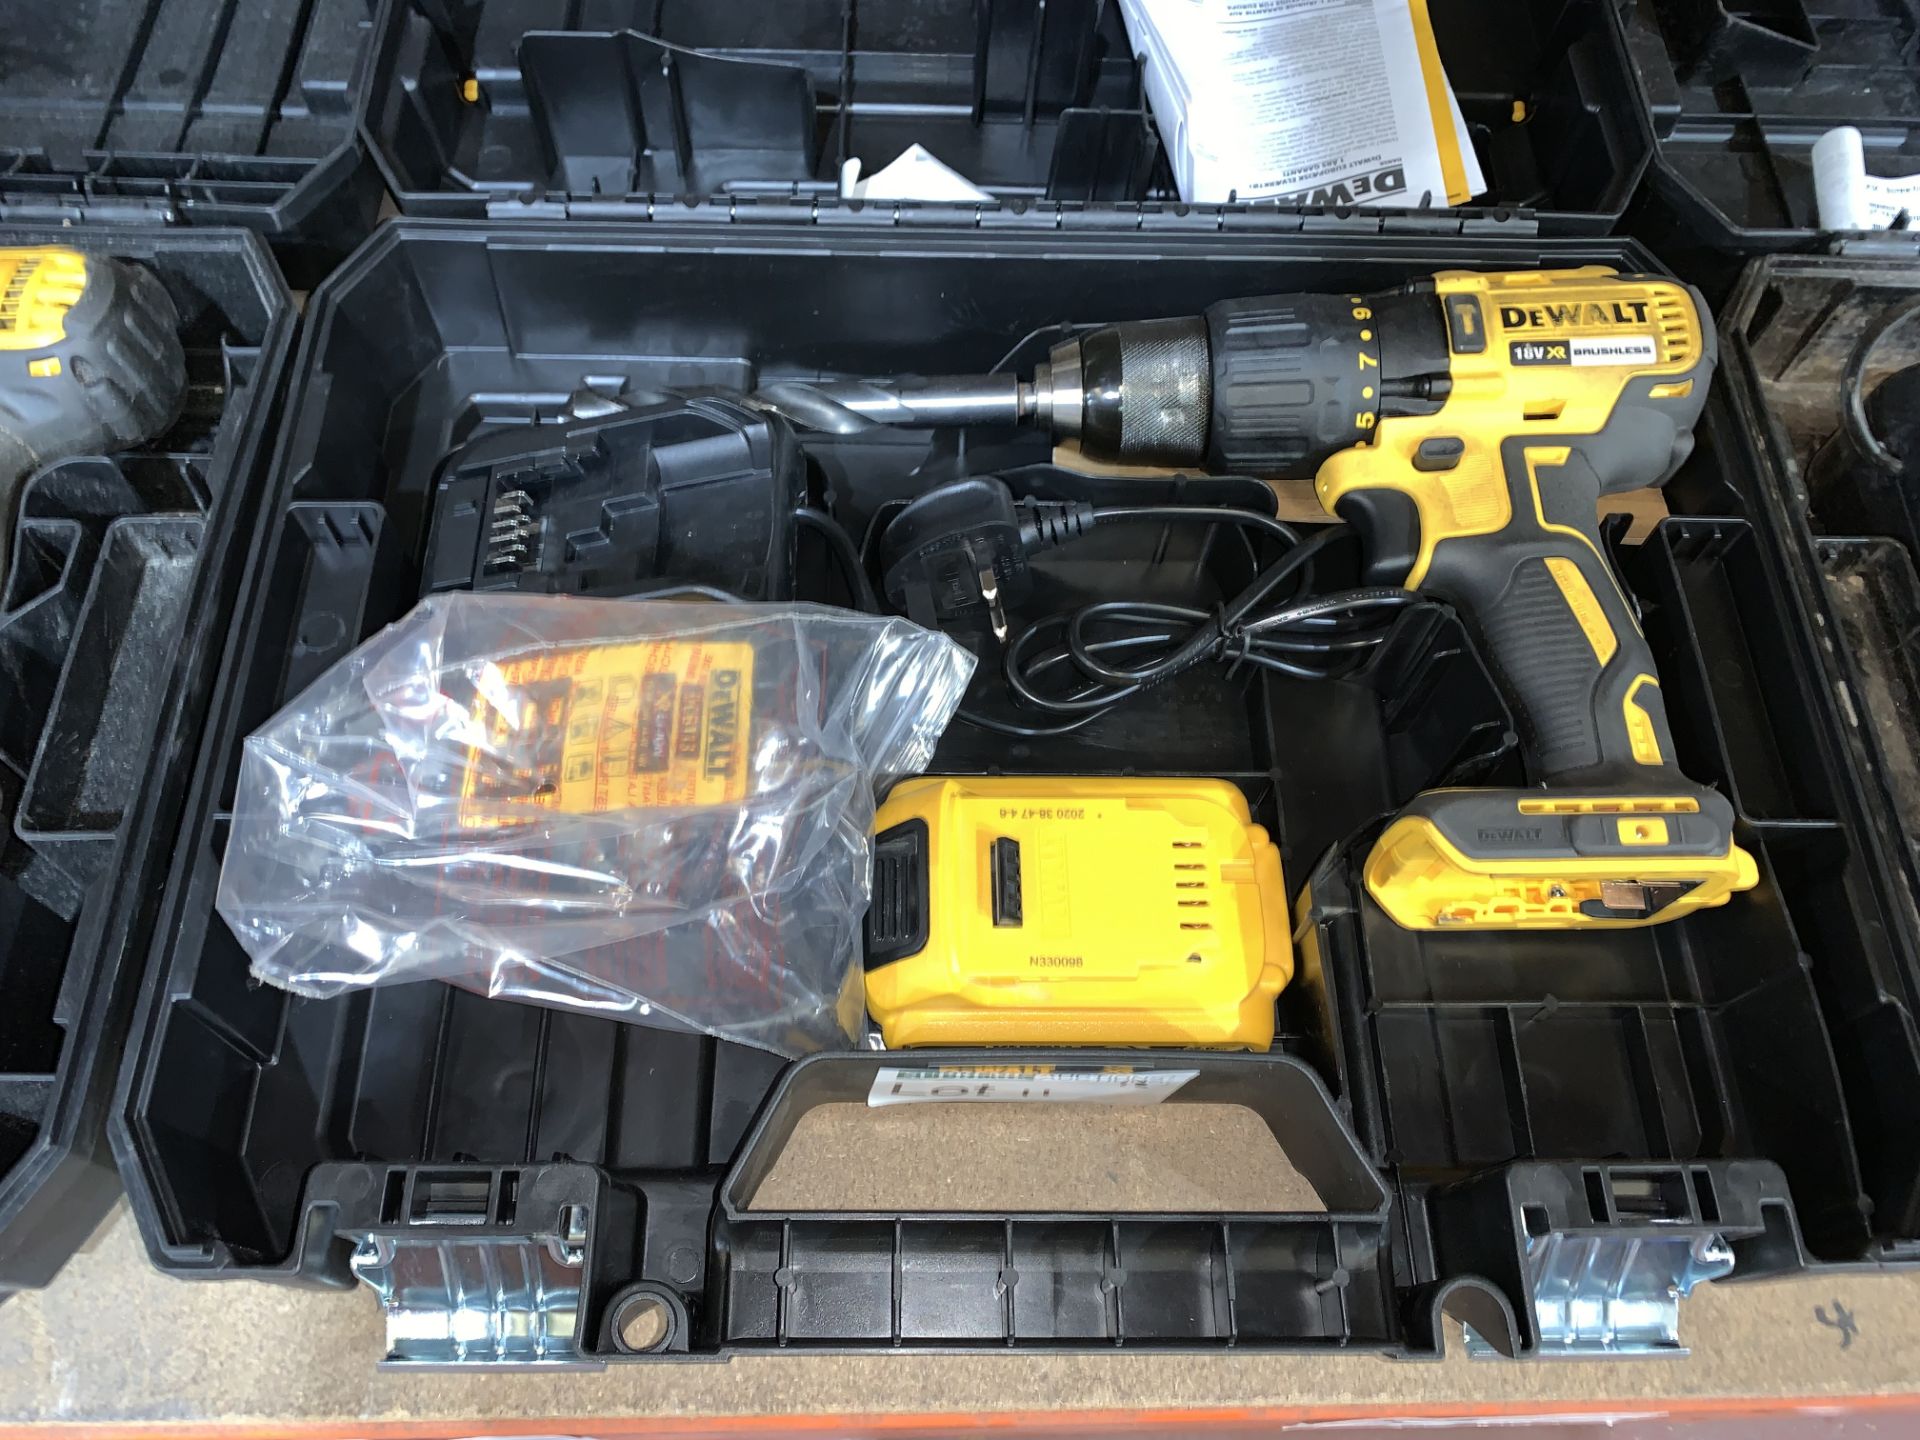 DEWALT DCD778M2T-SFGB 18V 4.0AH LI-ION XR BRUSHLESS CORDLESS COMBI DRILL COMES WITH BATTERY, CHARGER